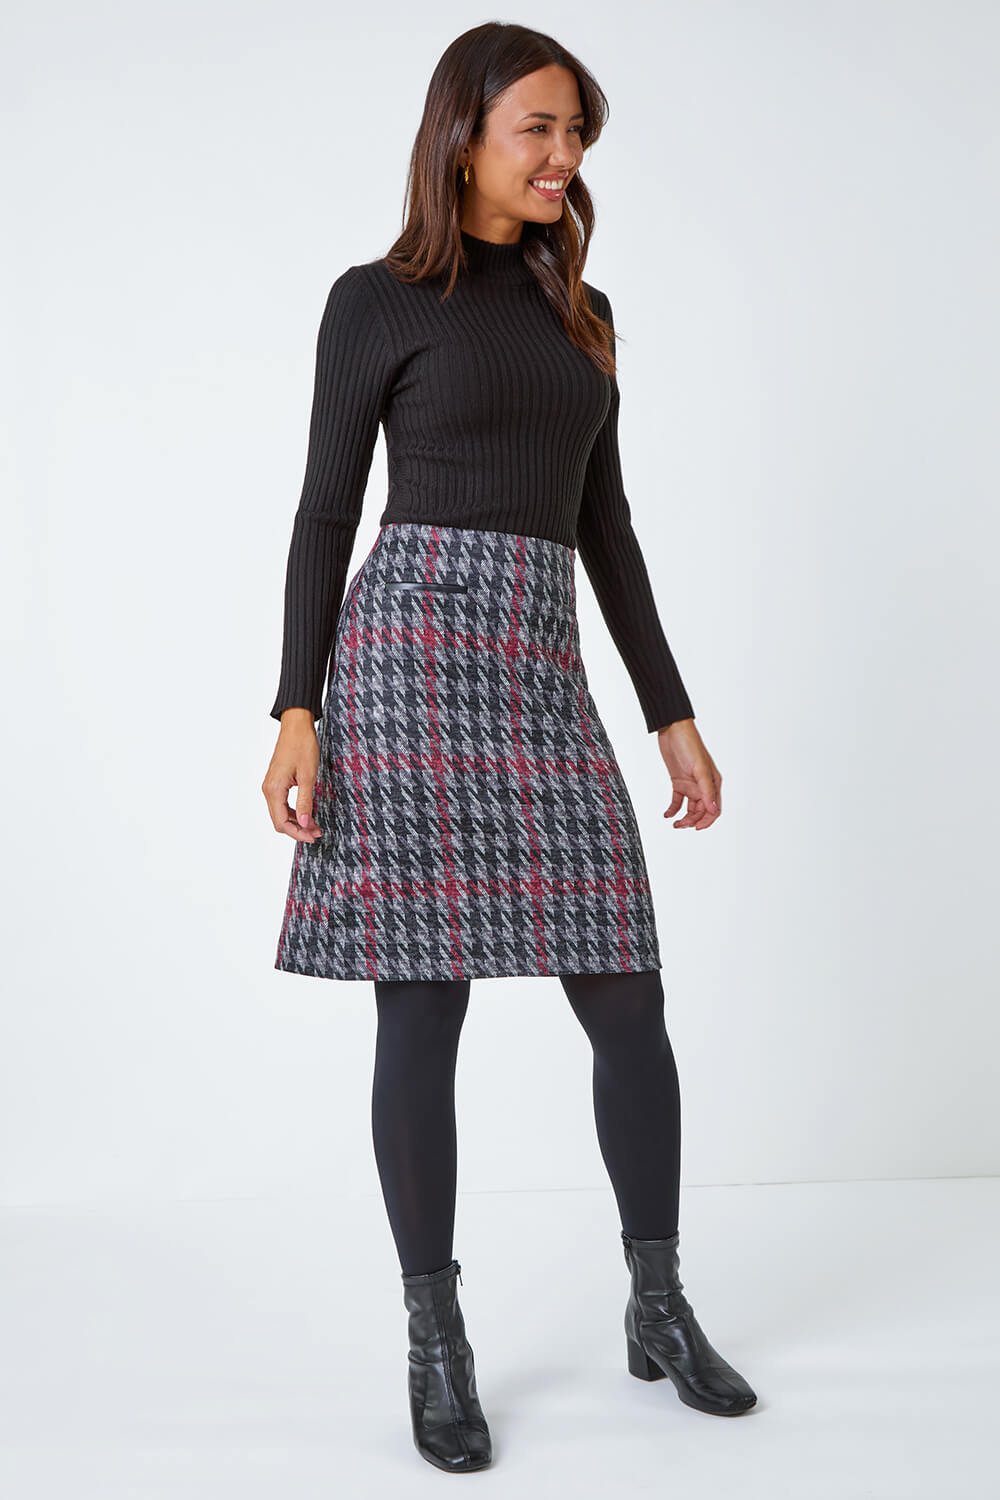 Red Houndstooth Stretch Pencil Skirt | Roman UK